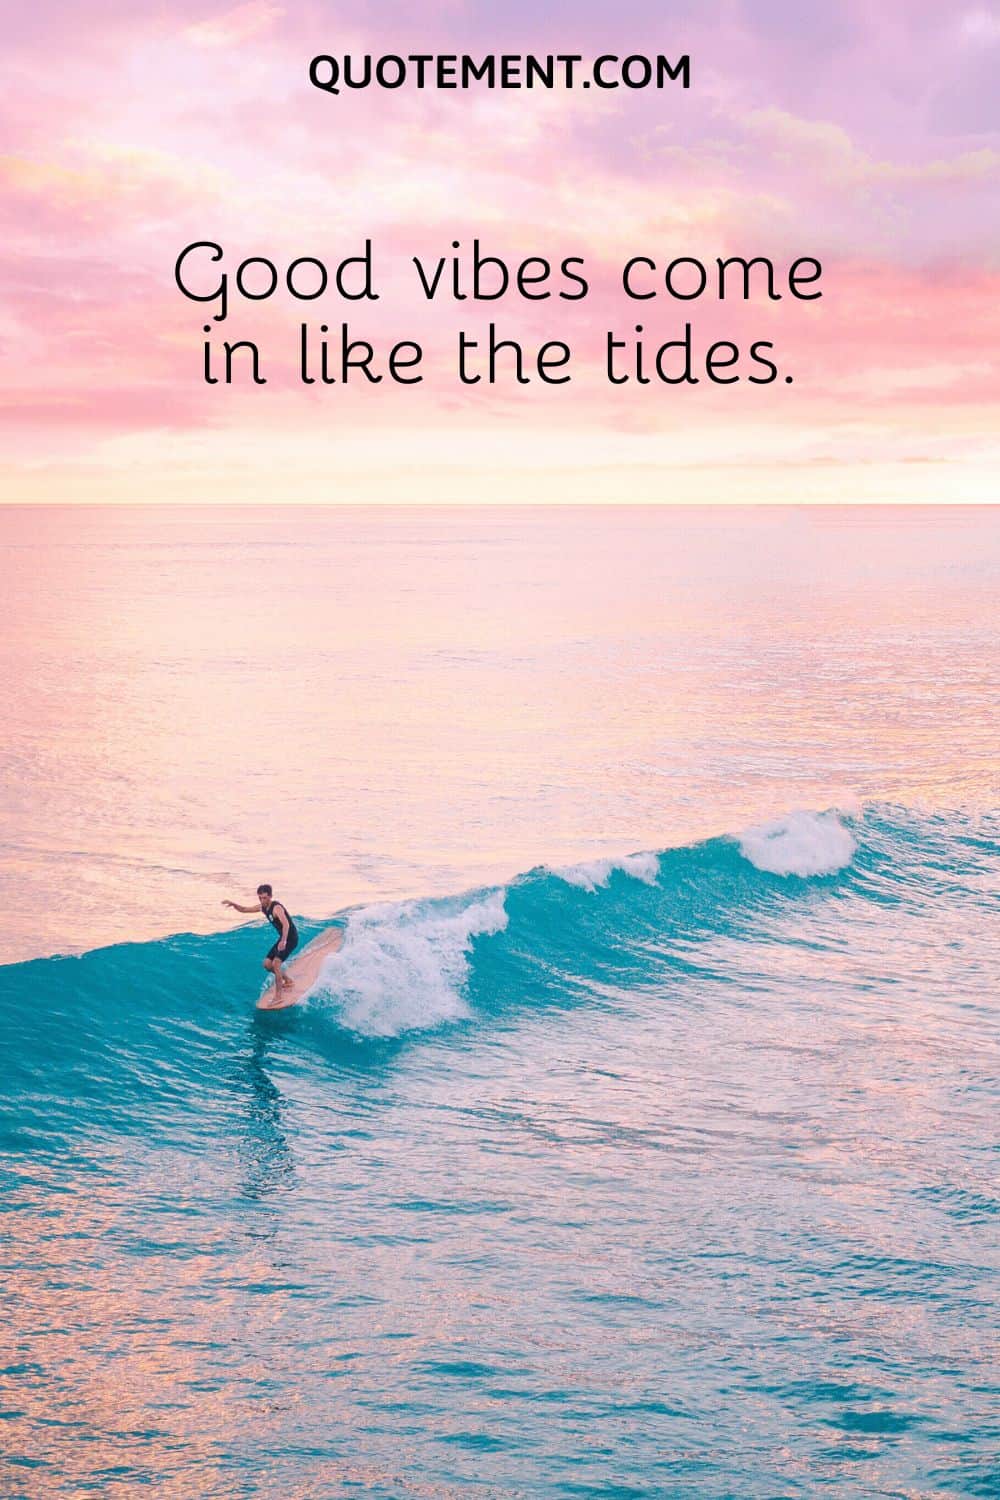 Good vibes come in like the tides.